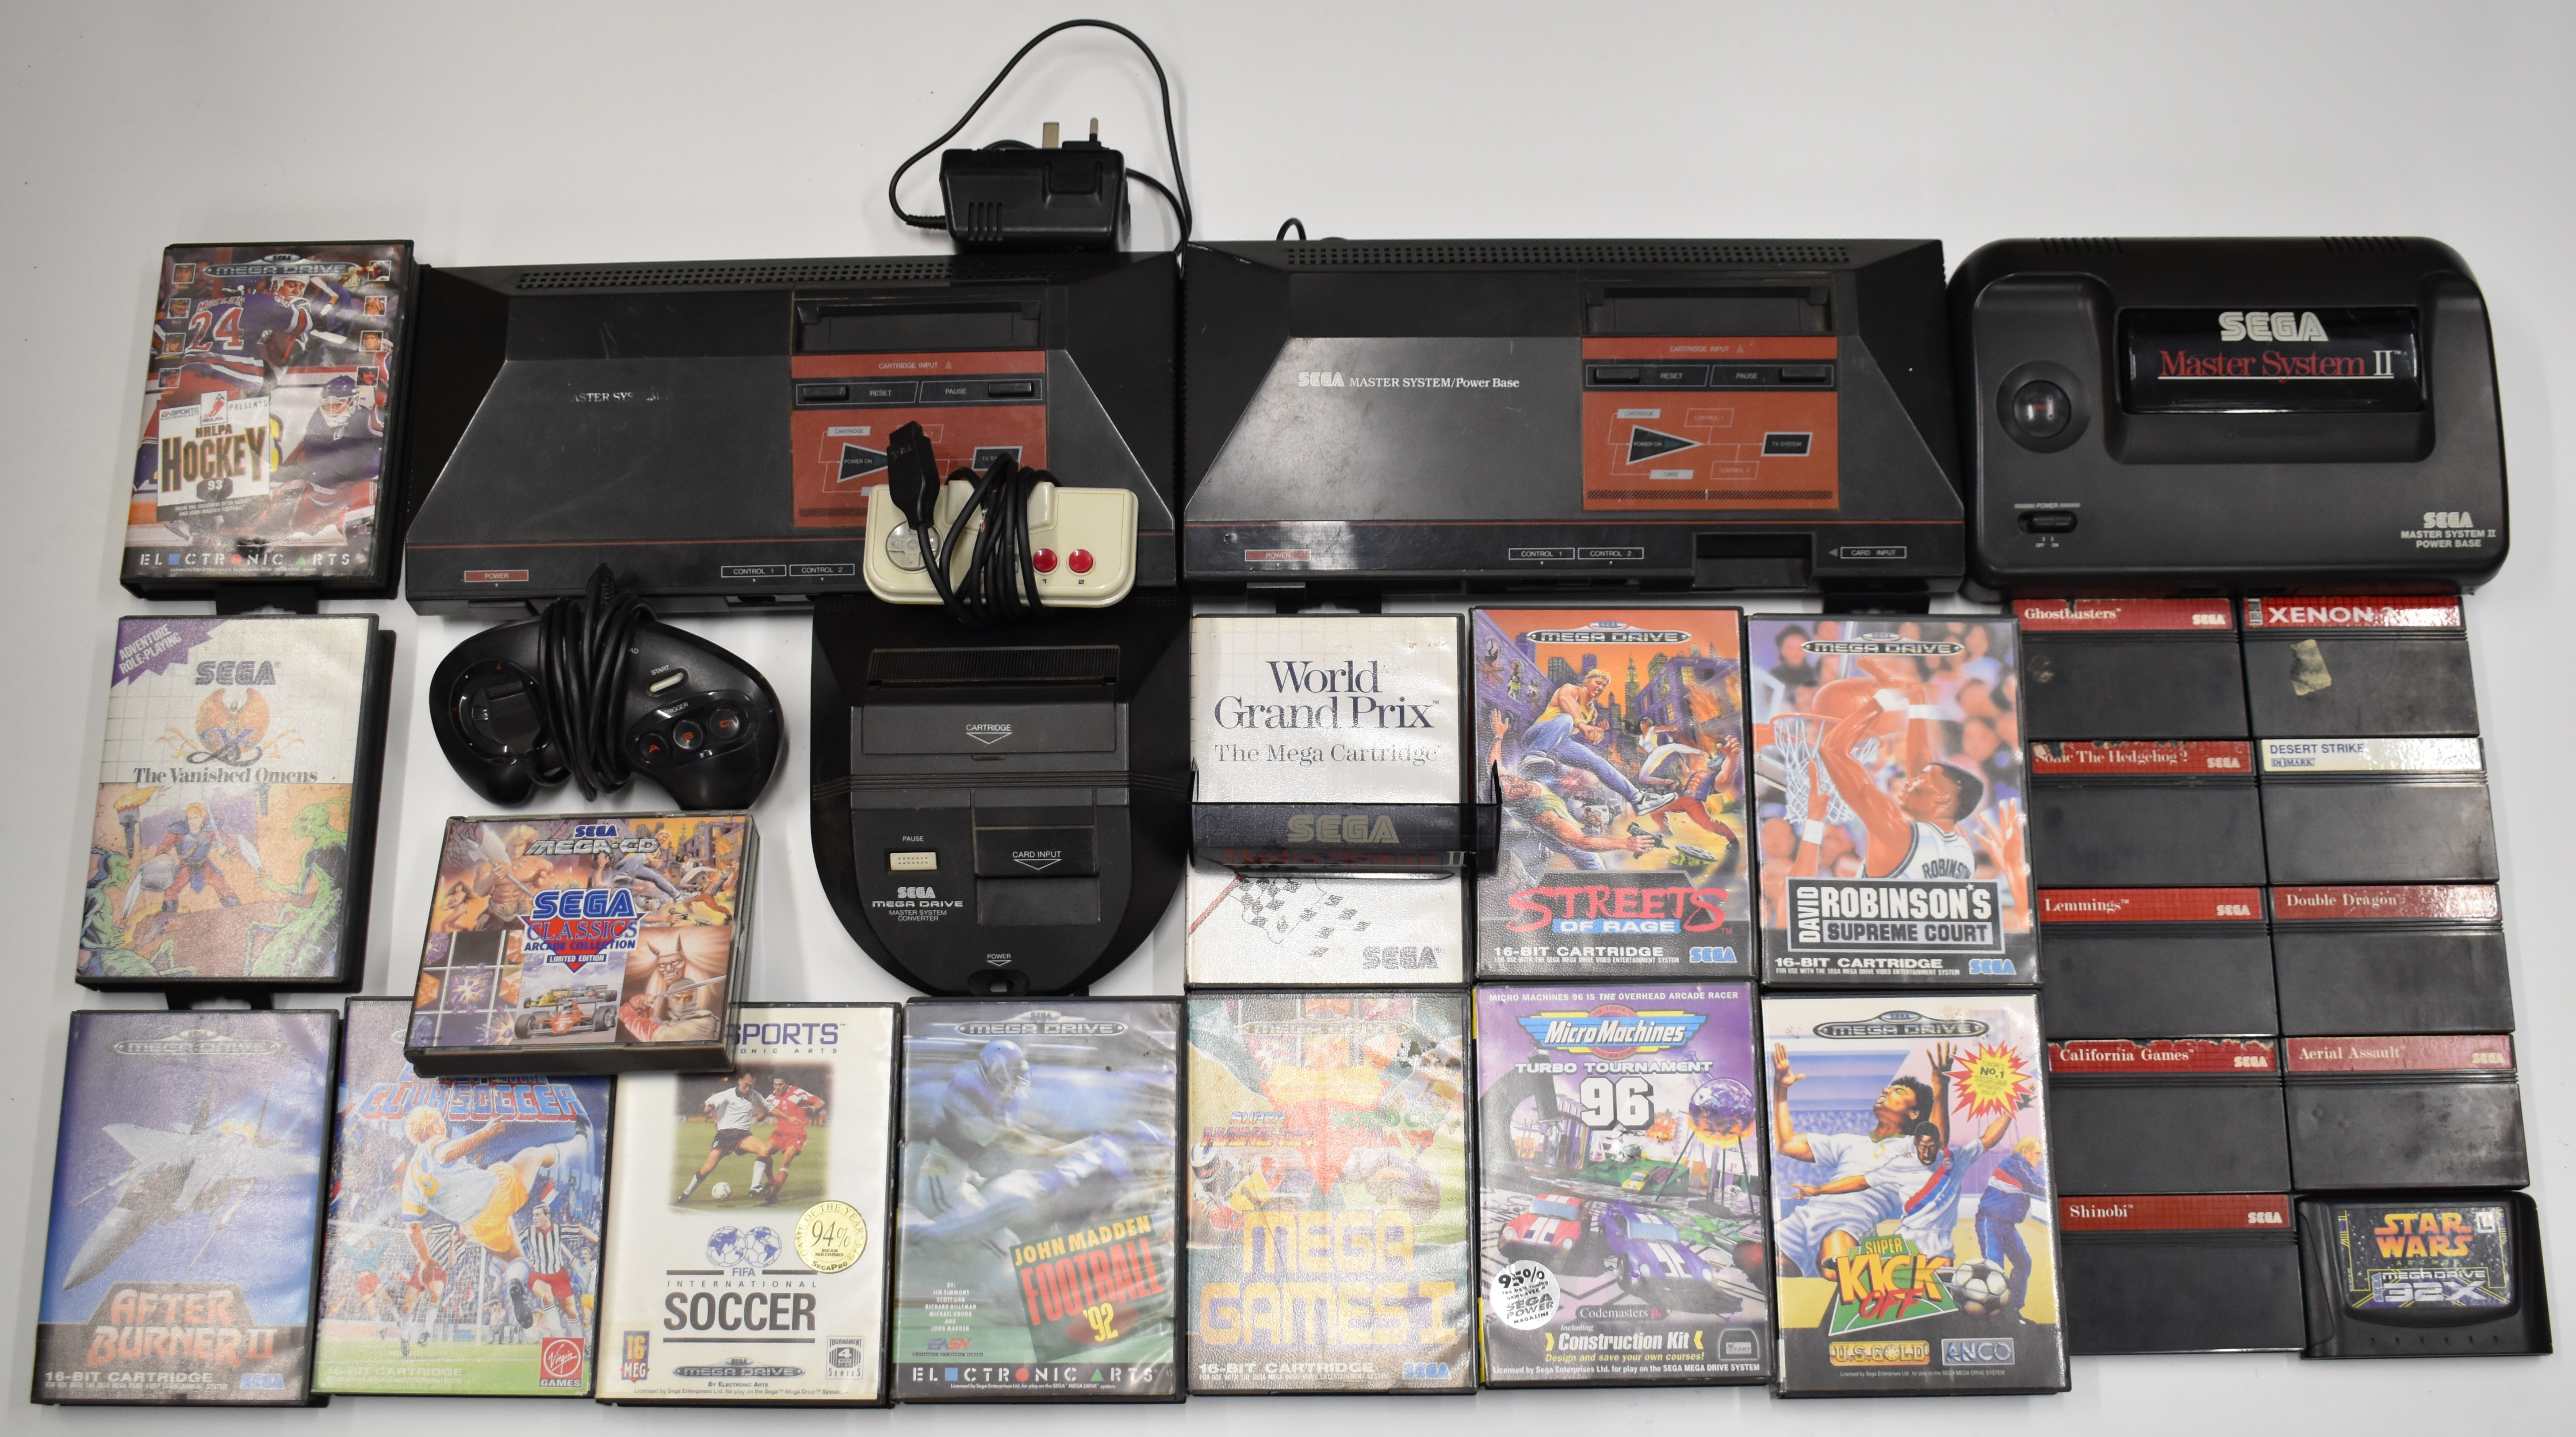 Three Sega retro video game consoles together with a collection of 22 Master System and Mega Drive